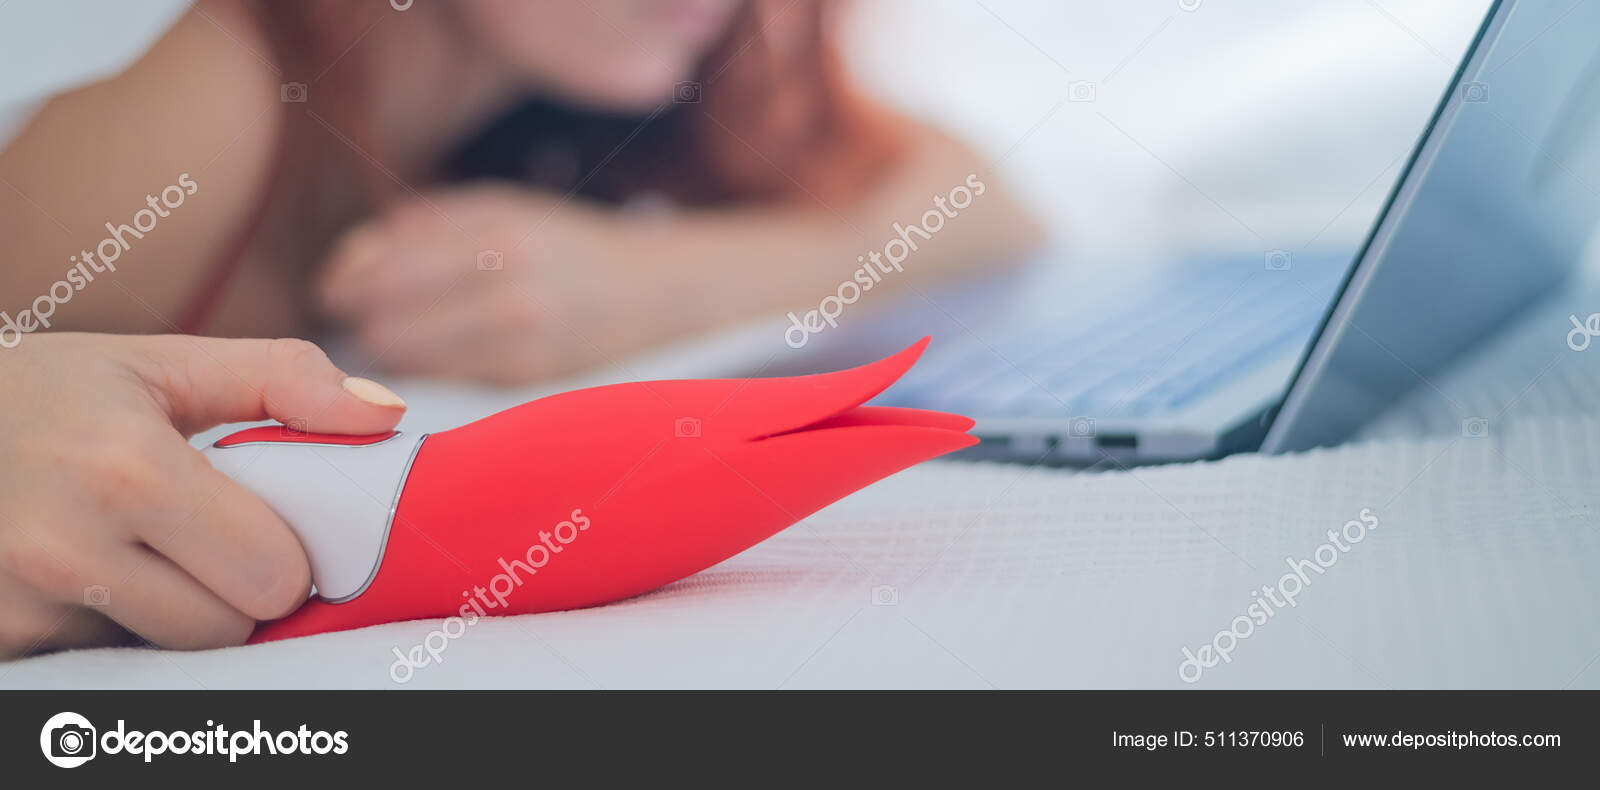 A woman lies in bed holding a clitoral vibrator and watching porn on a laptop photo pic